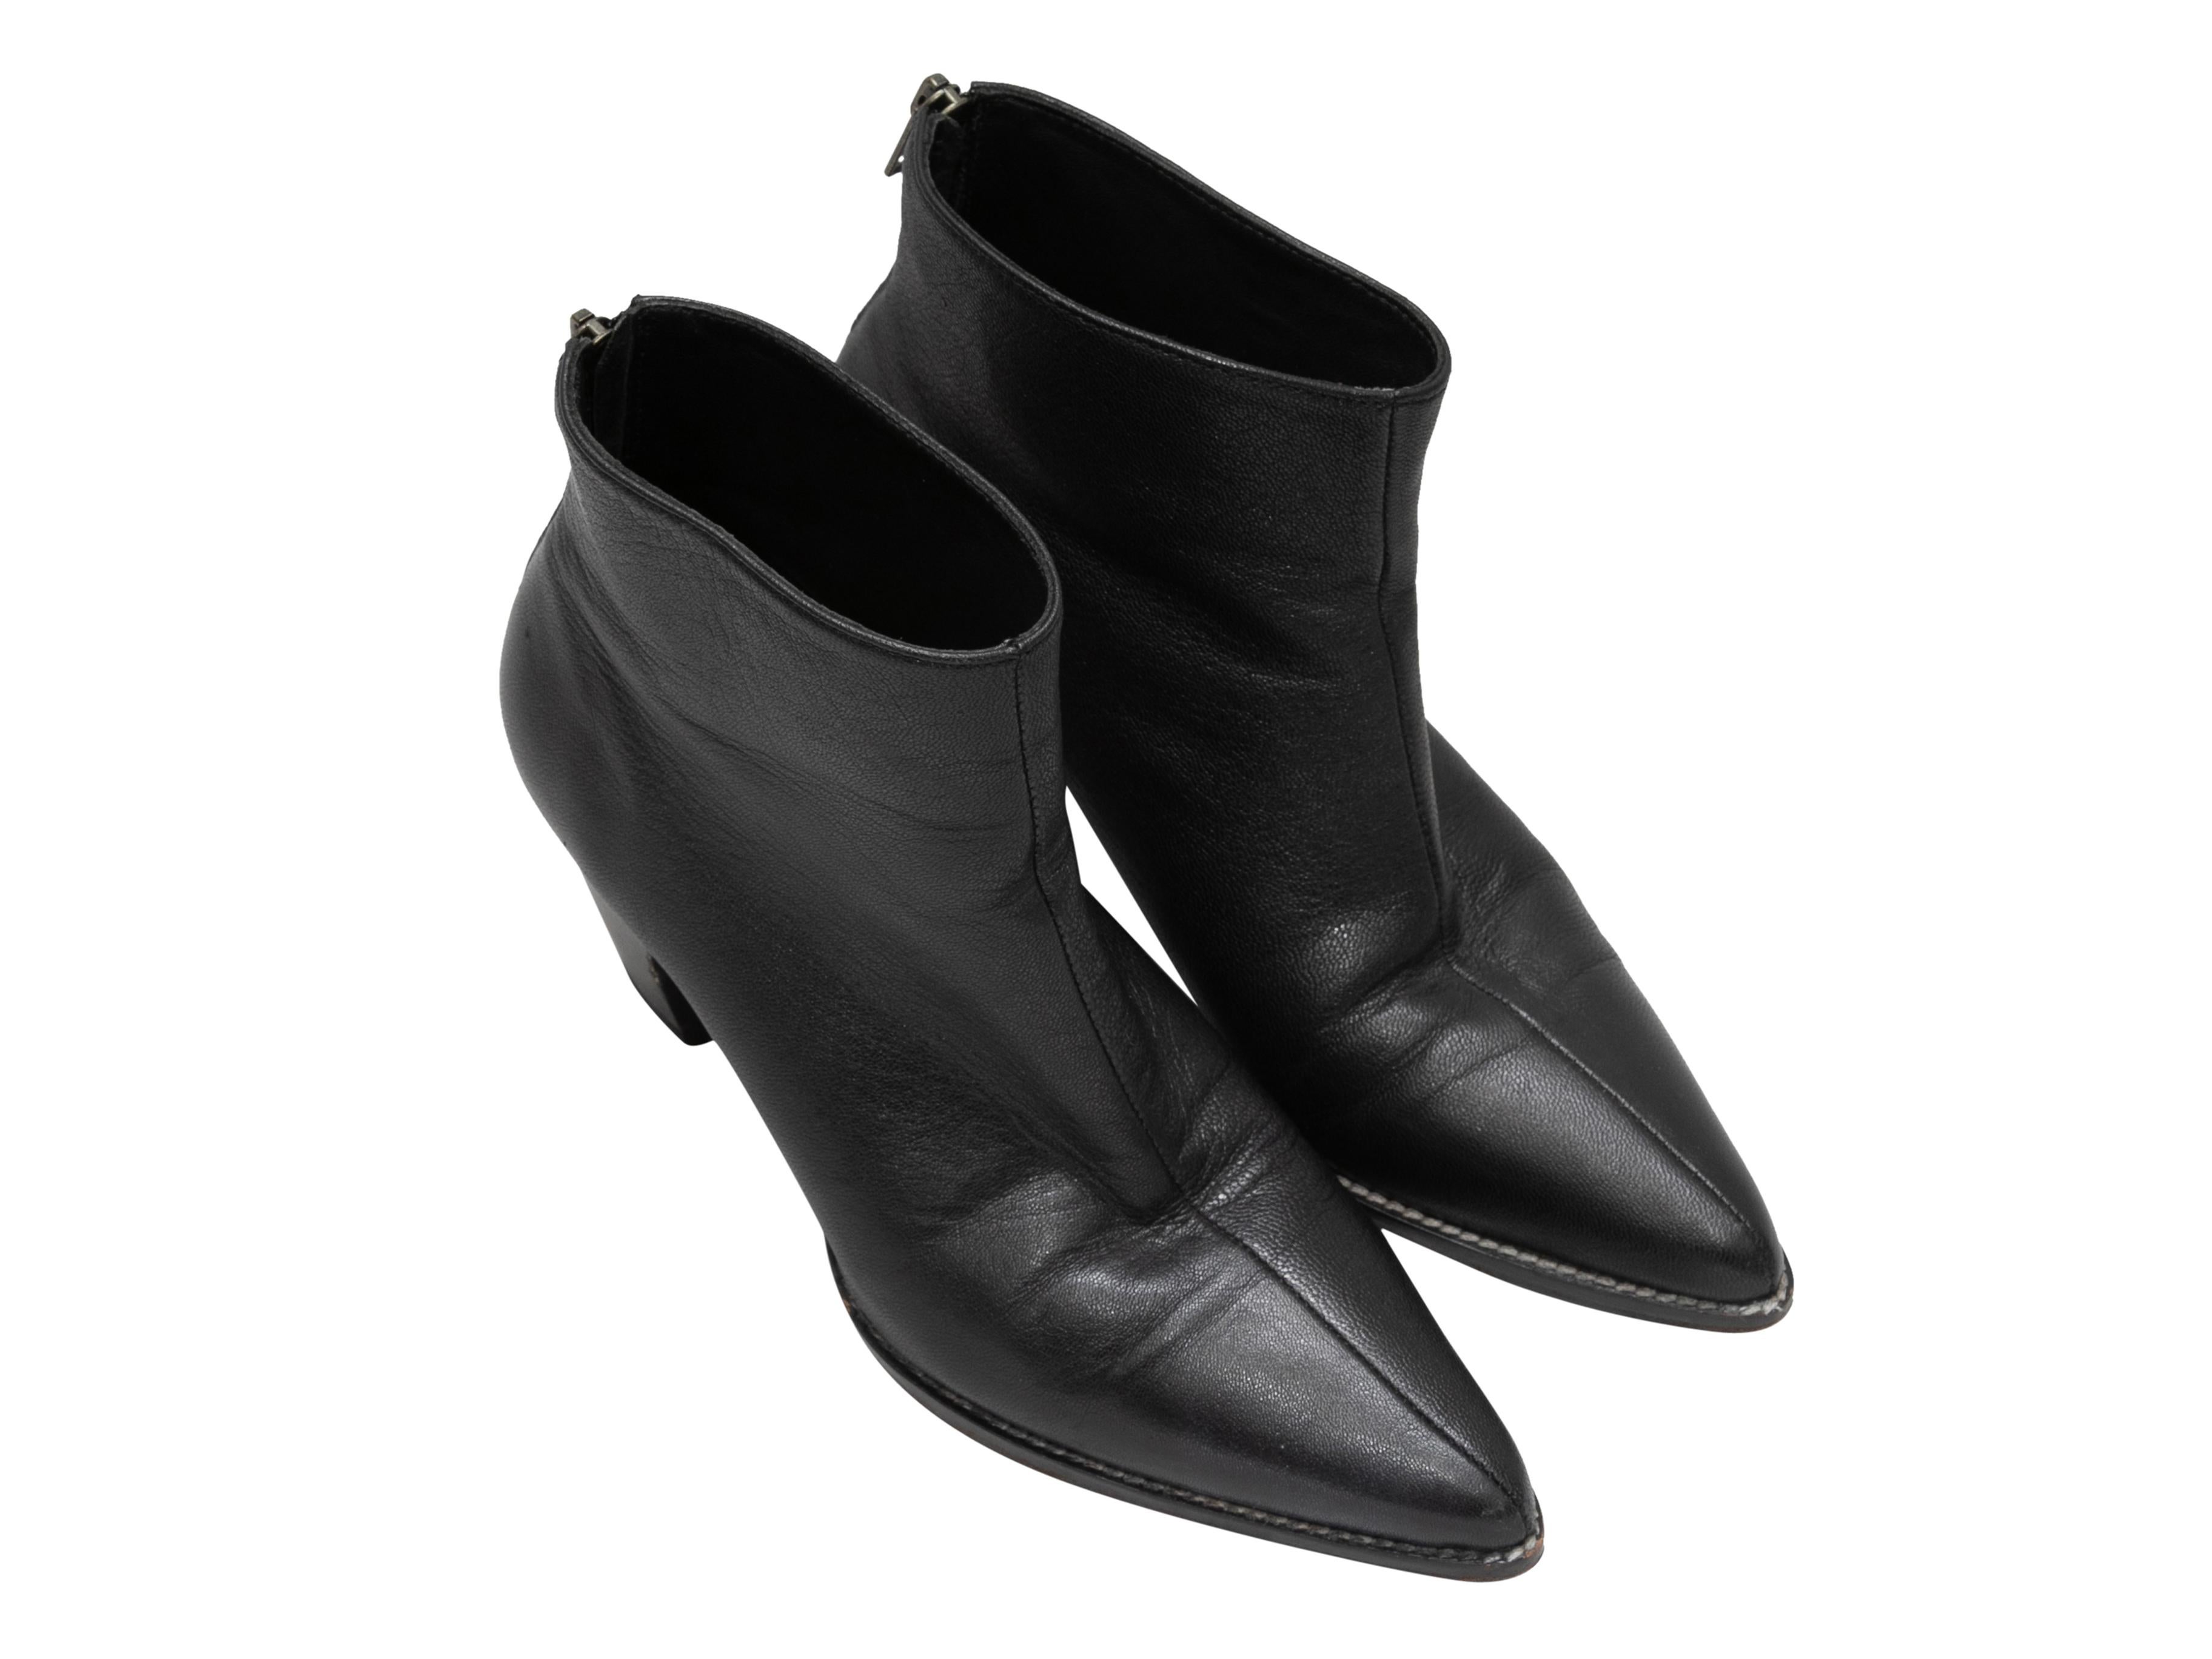 Black leather pointed-toe ankle boots by Rachel Comey. Zip closures at counters. 2.5